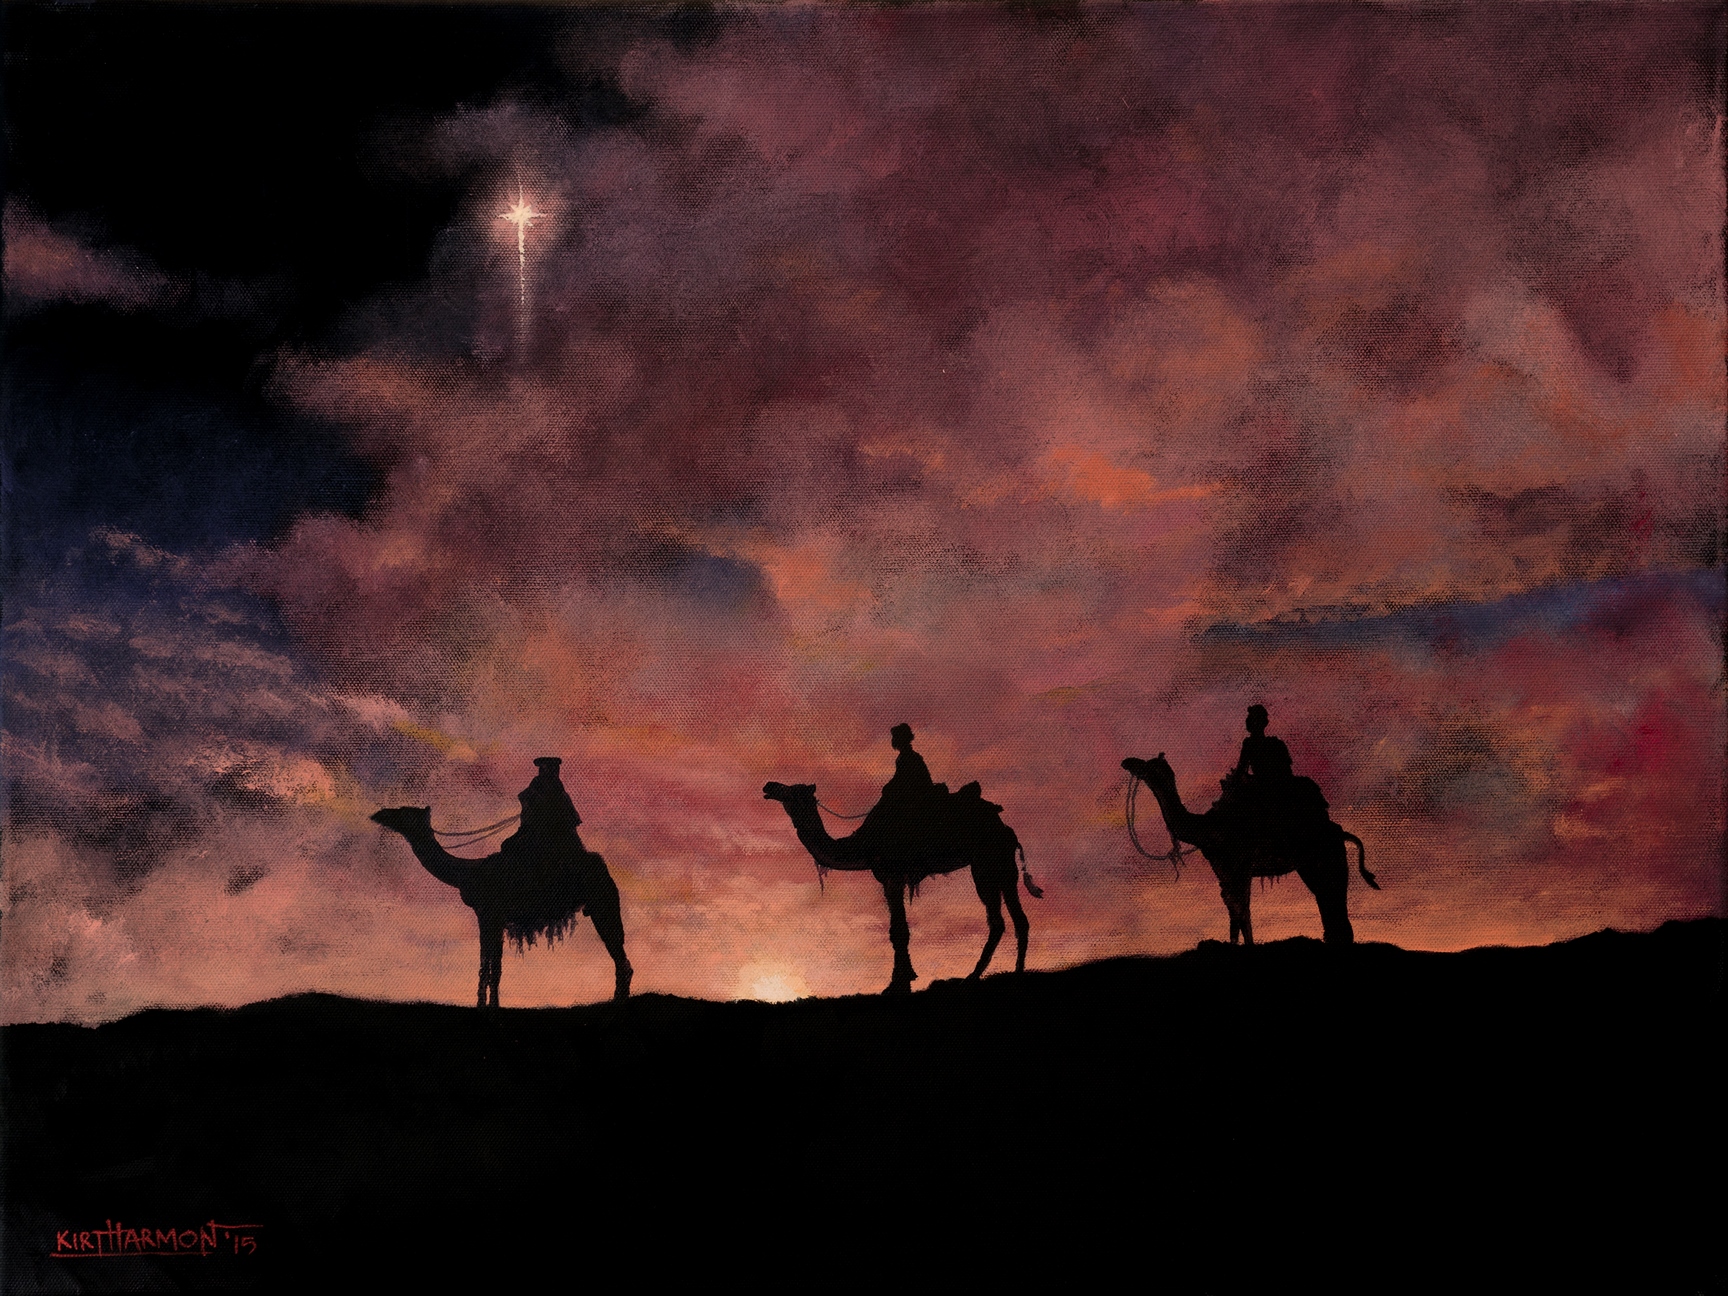 For we have seen his star (limited edition canvas print)